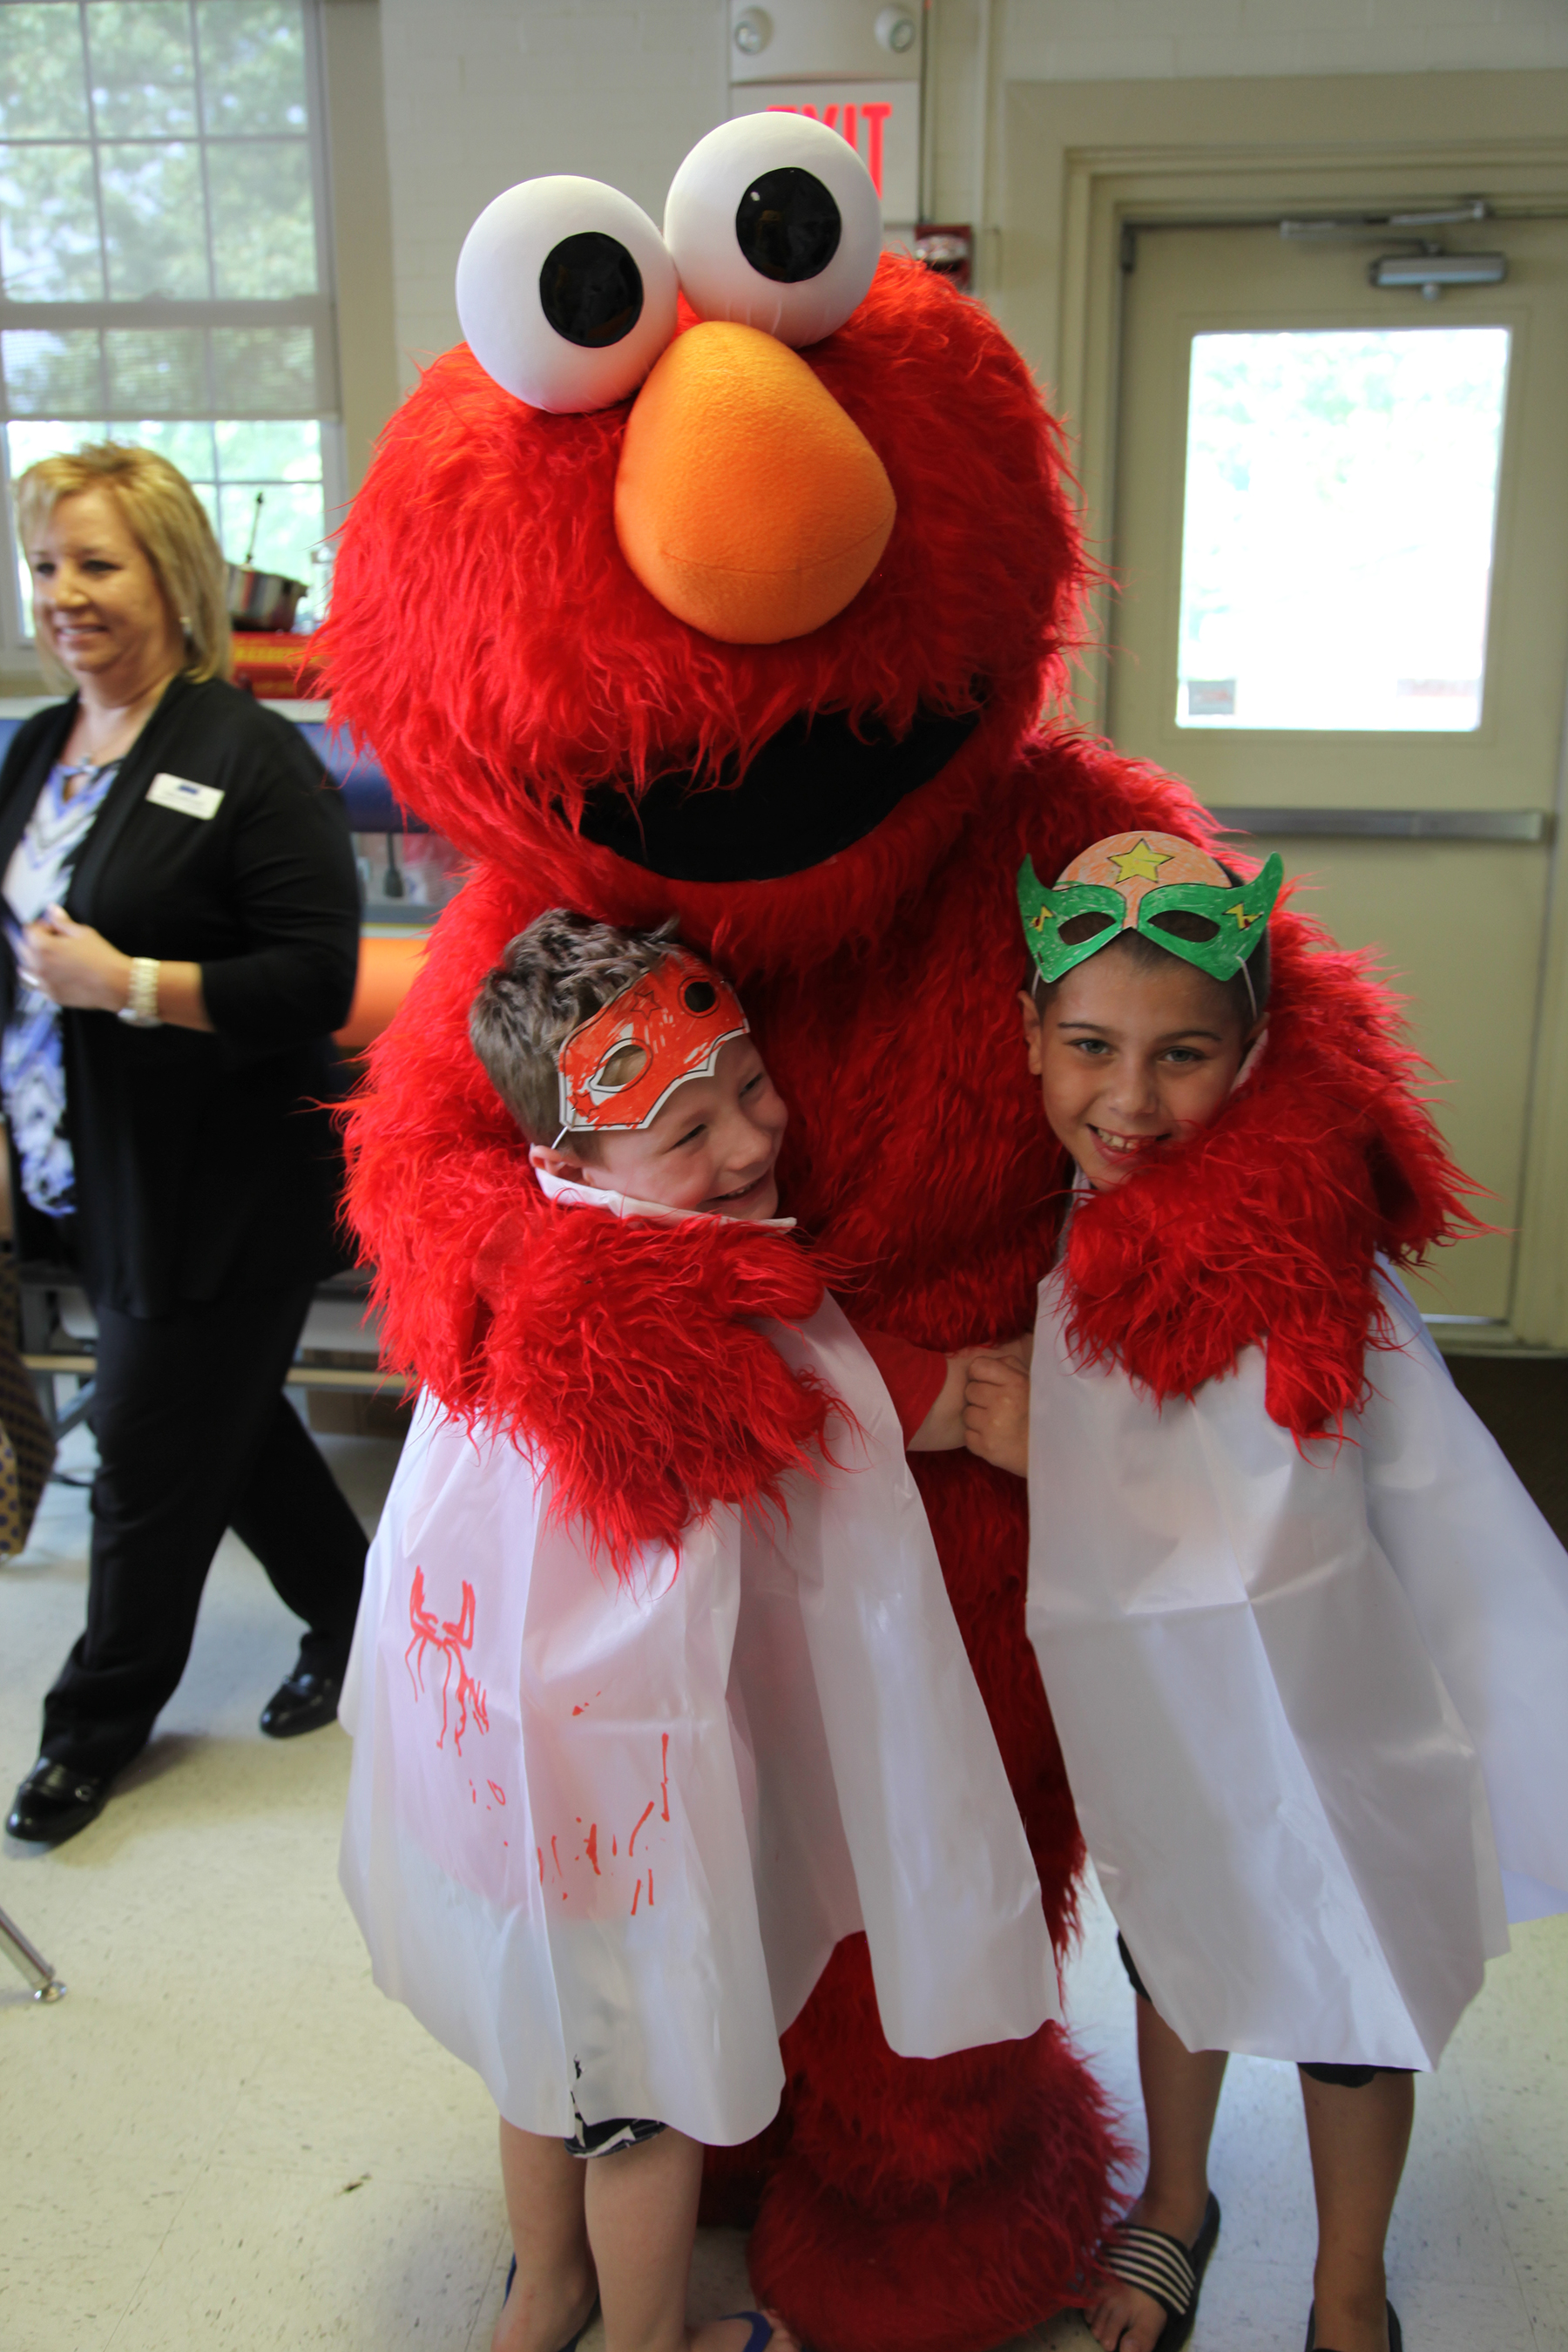 Two boys wearing protective cloths and masks are embraced by Elmo.